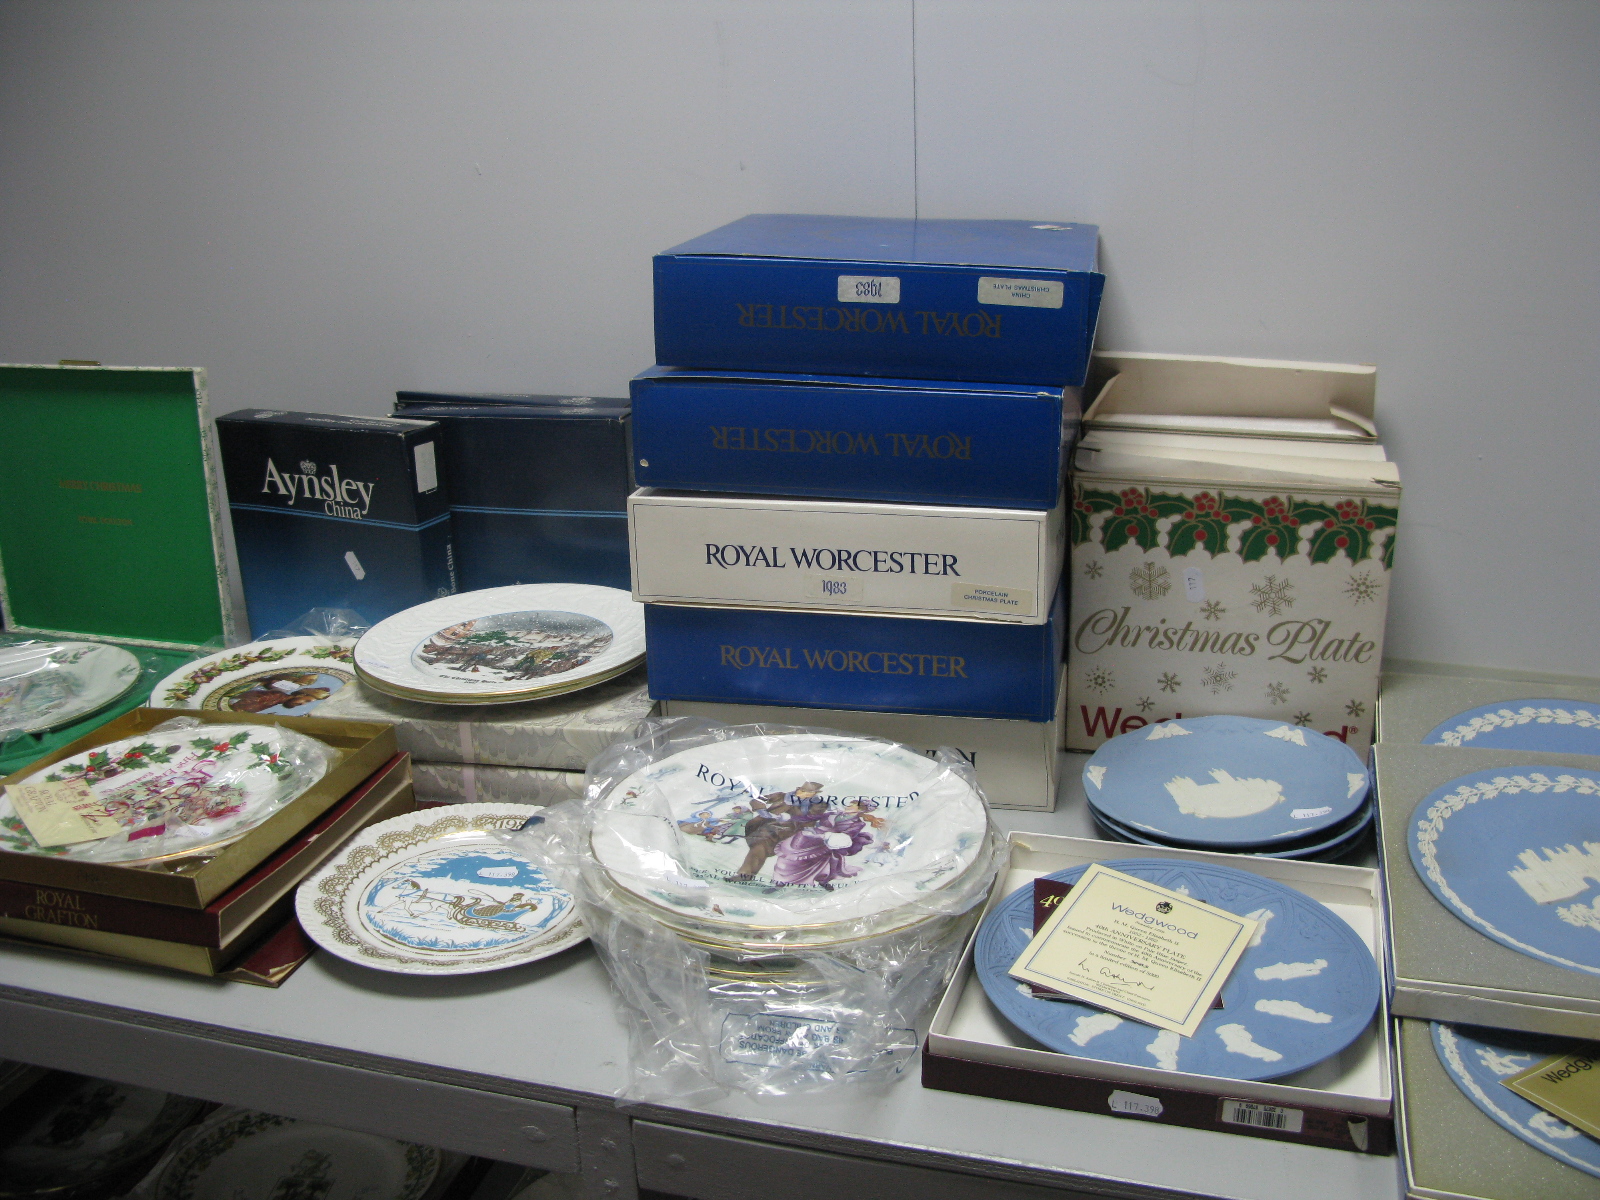 A Collection of Christmas Plates, including Wedgwood Jasperware, Aynsley, Royal Grafton, Spode,